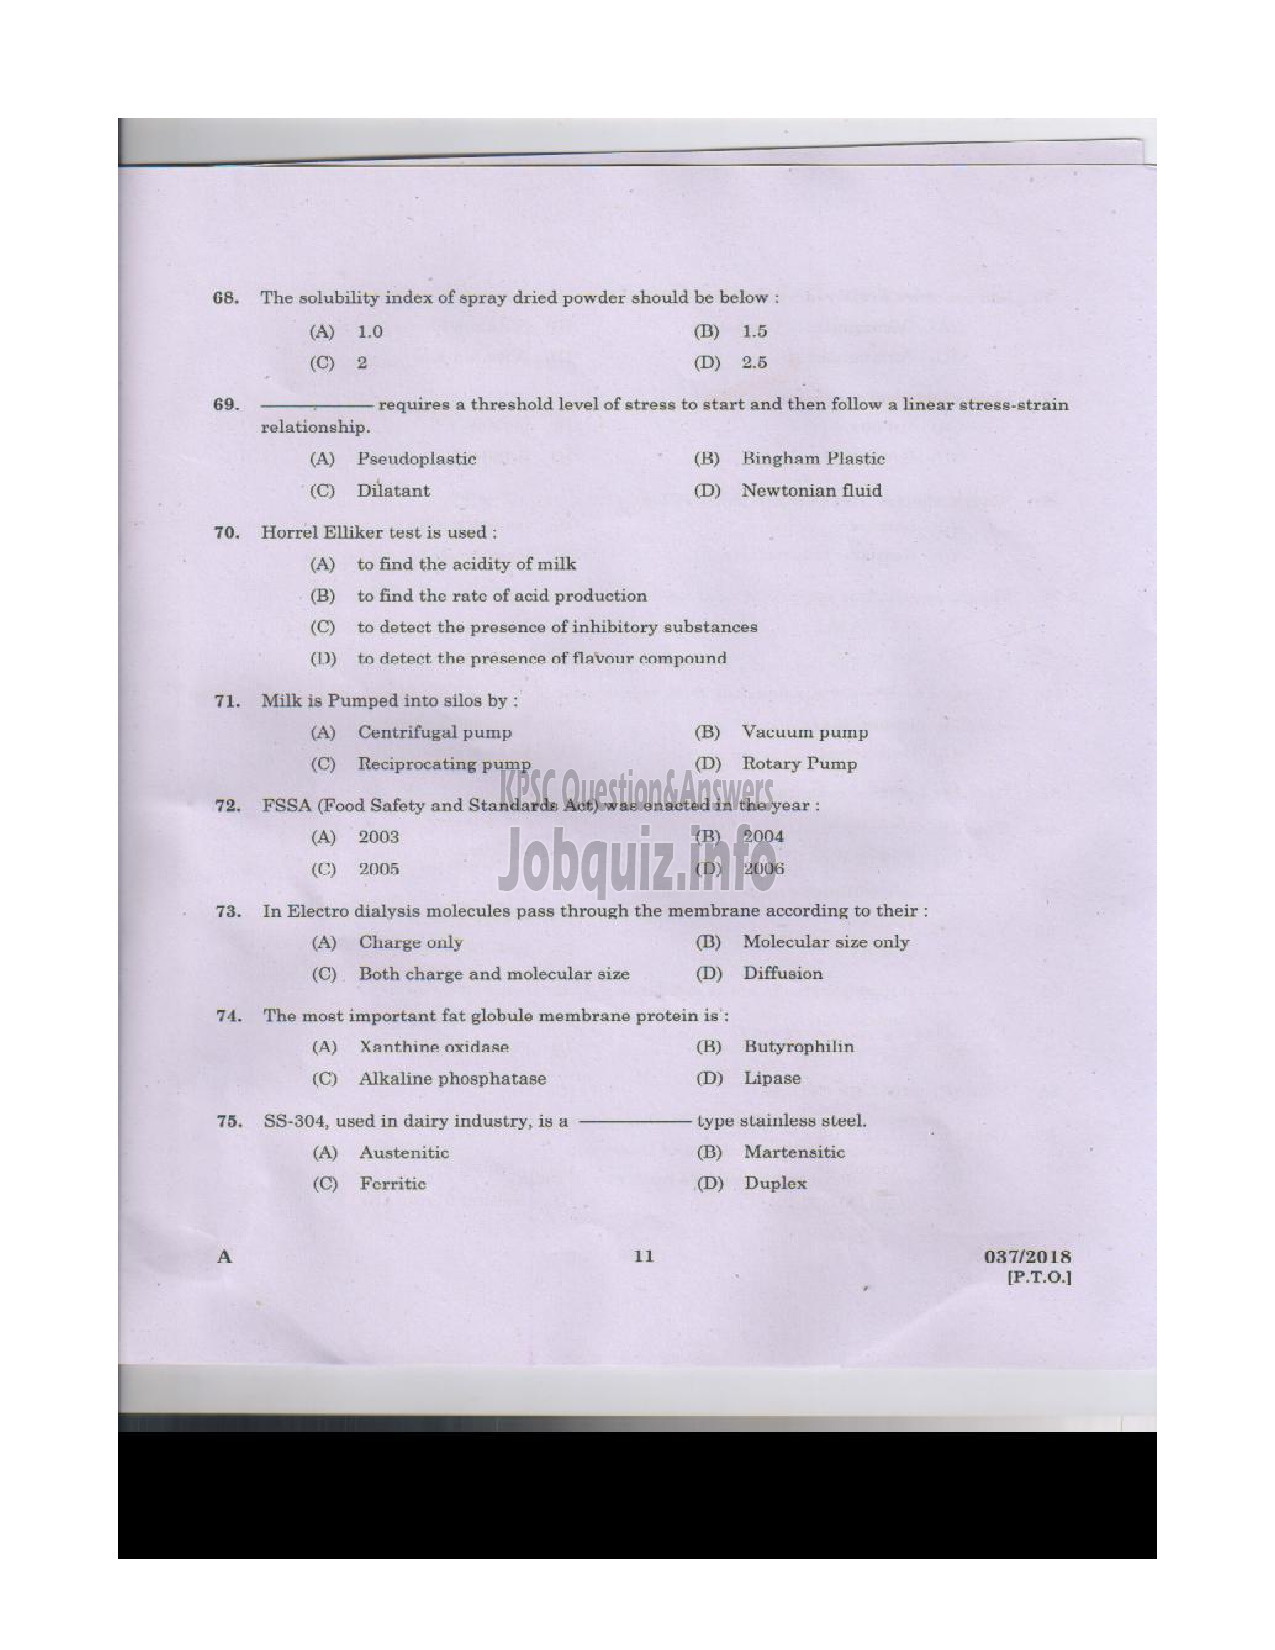 Kerala PSC Question Paper - VOCATIONAL INSTRUCTOR IN DAIRYING MILK PRODUCTS VOCATIONAL HIGHER SECONDARY EDUCATION-10